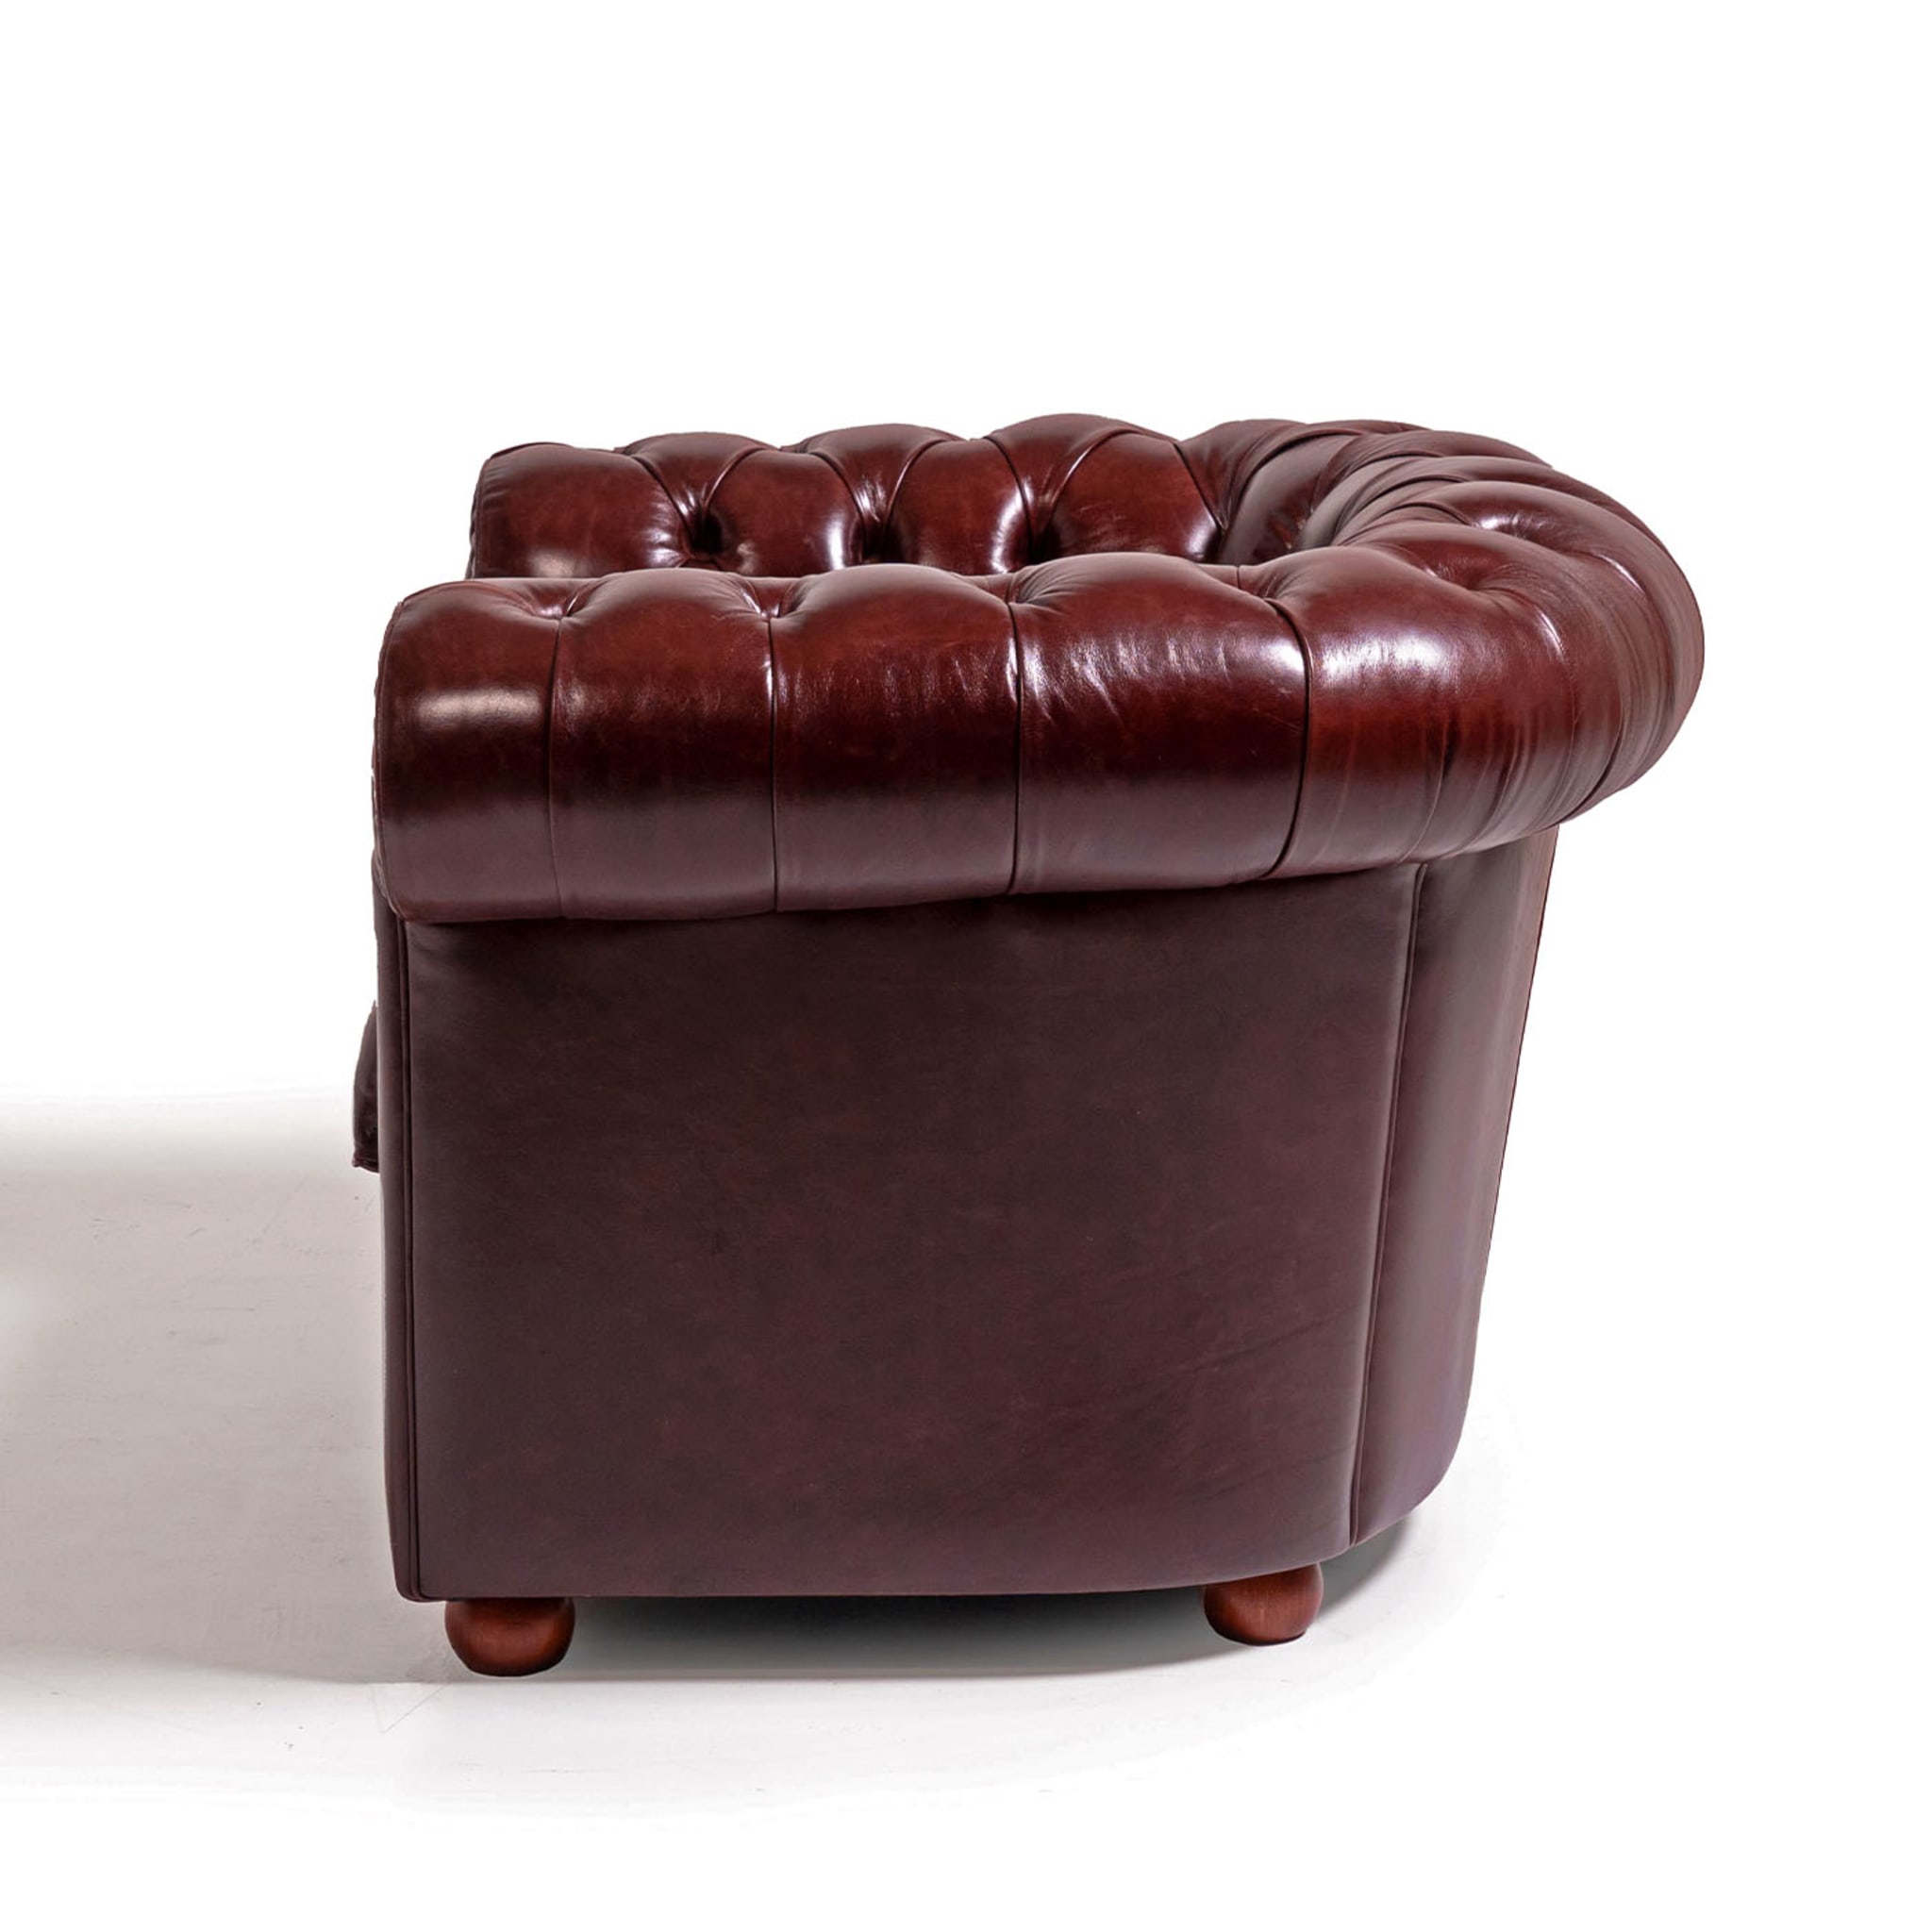 Chesterfield Ruby Leather Armchair Tribeca Collection - Alternative view 1